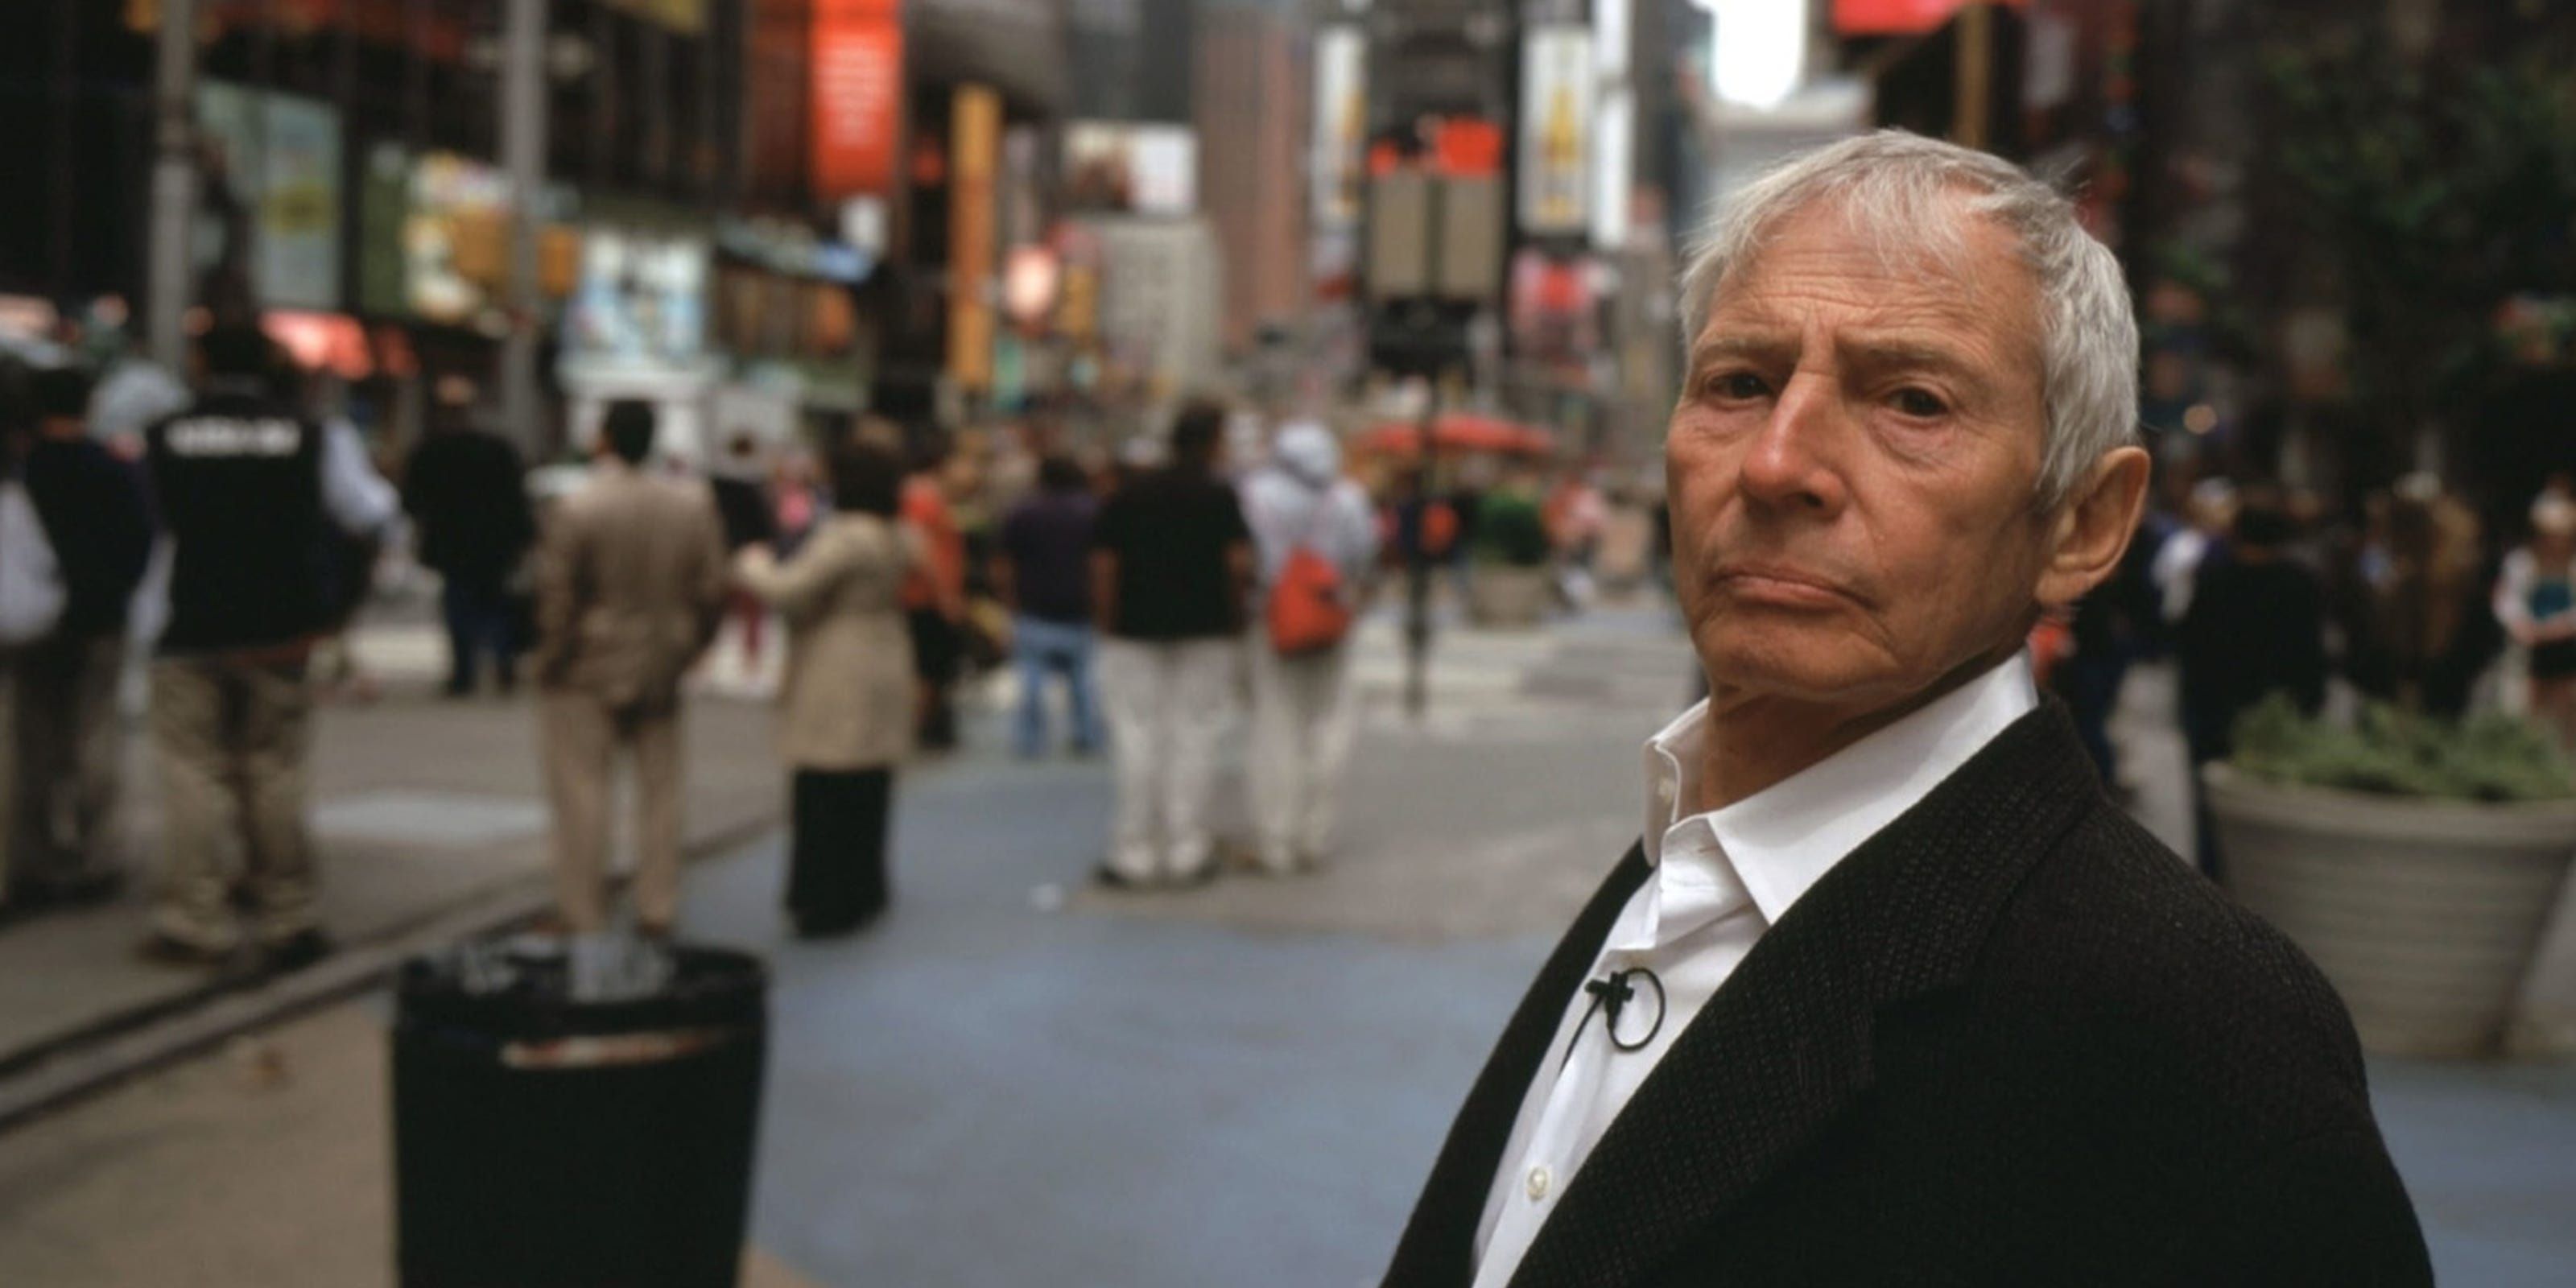 Robert Alan Durst in HBO miniseries The Jinx The Life and Deaths of Robert Durst